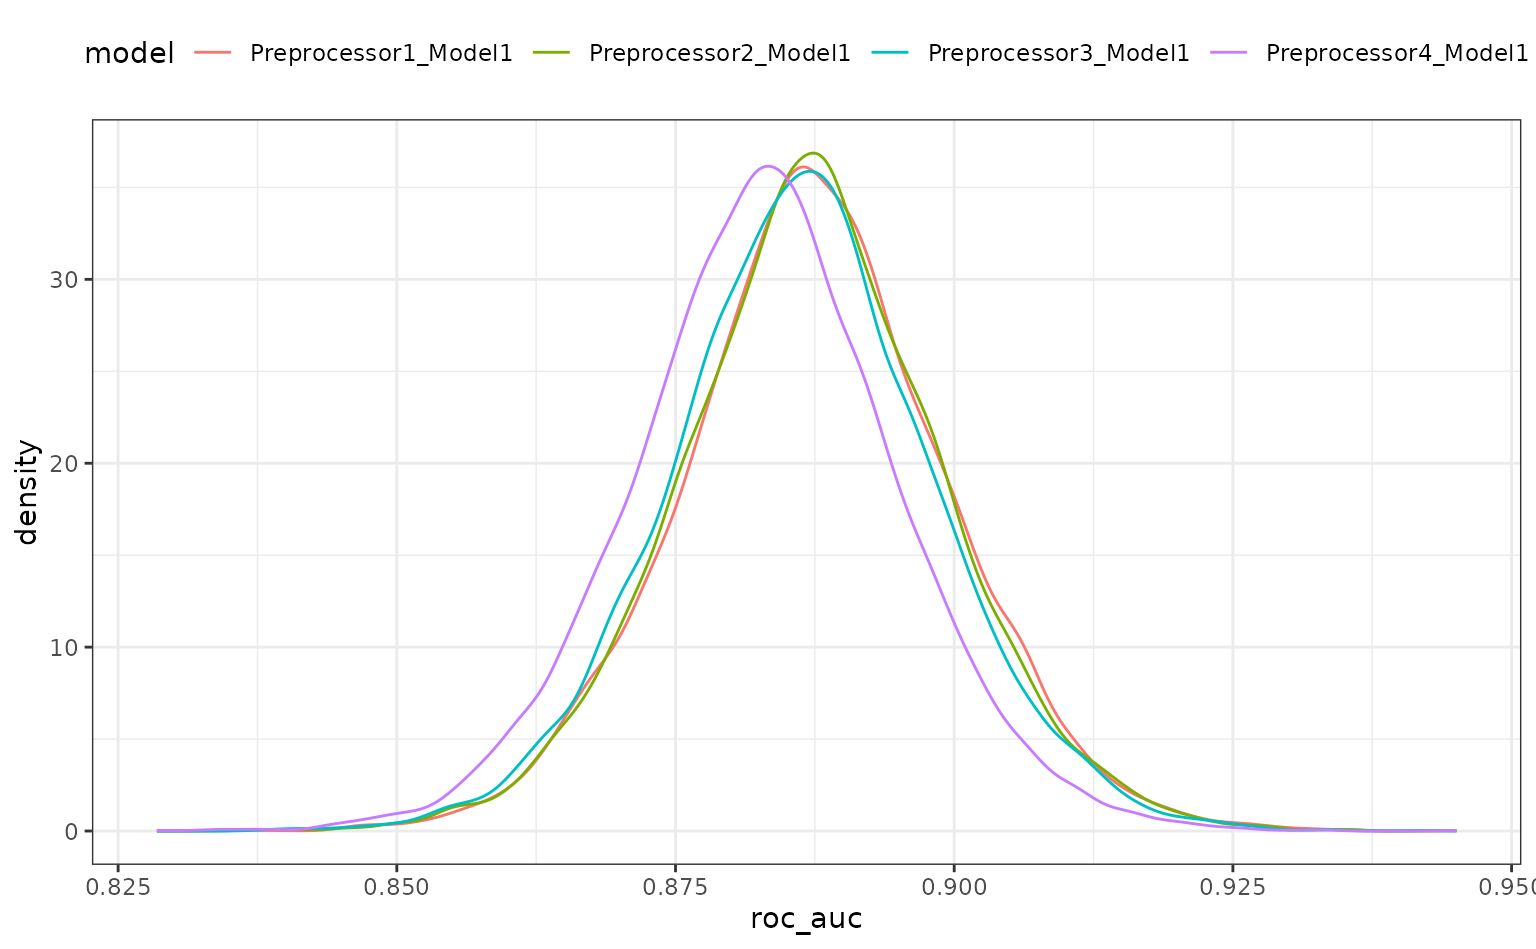 Line chart. roc_auc along the x-axis, density along the y-axis. The density lines are colored according to the preprocessor. There is a fair amount of overlap. With Preprocessor4 having the lowest values.